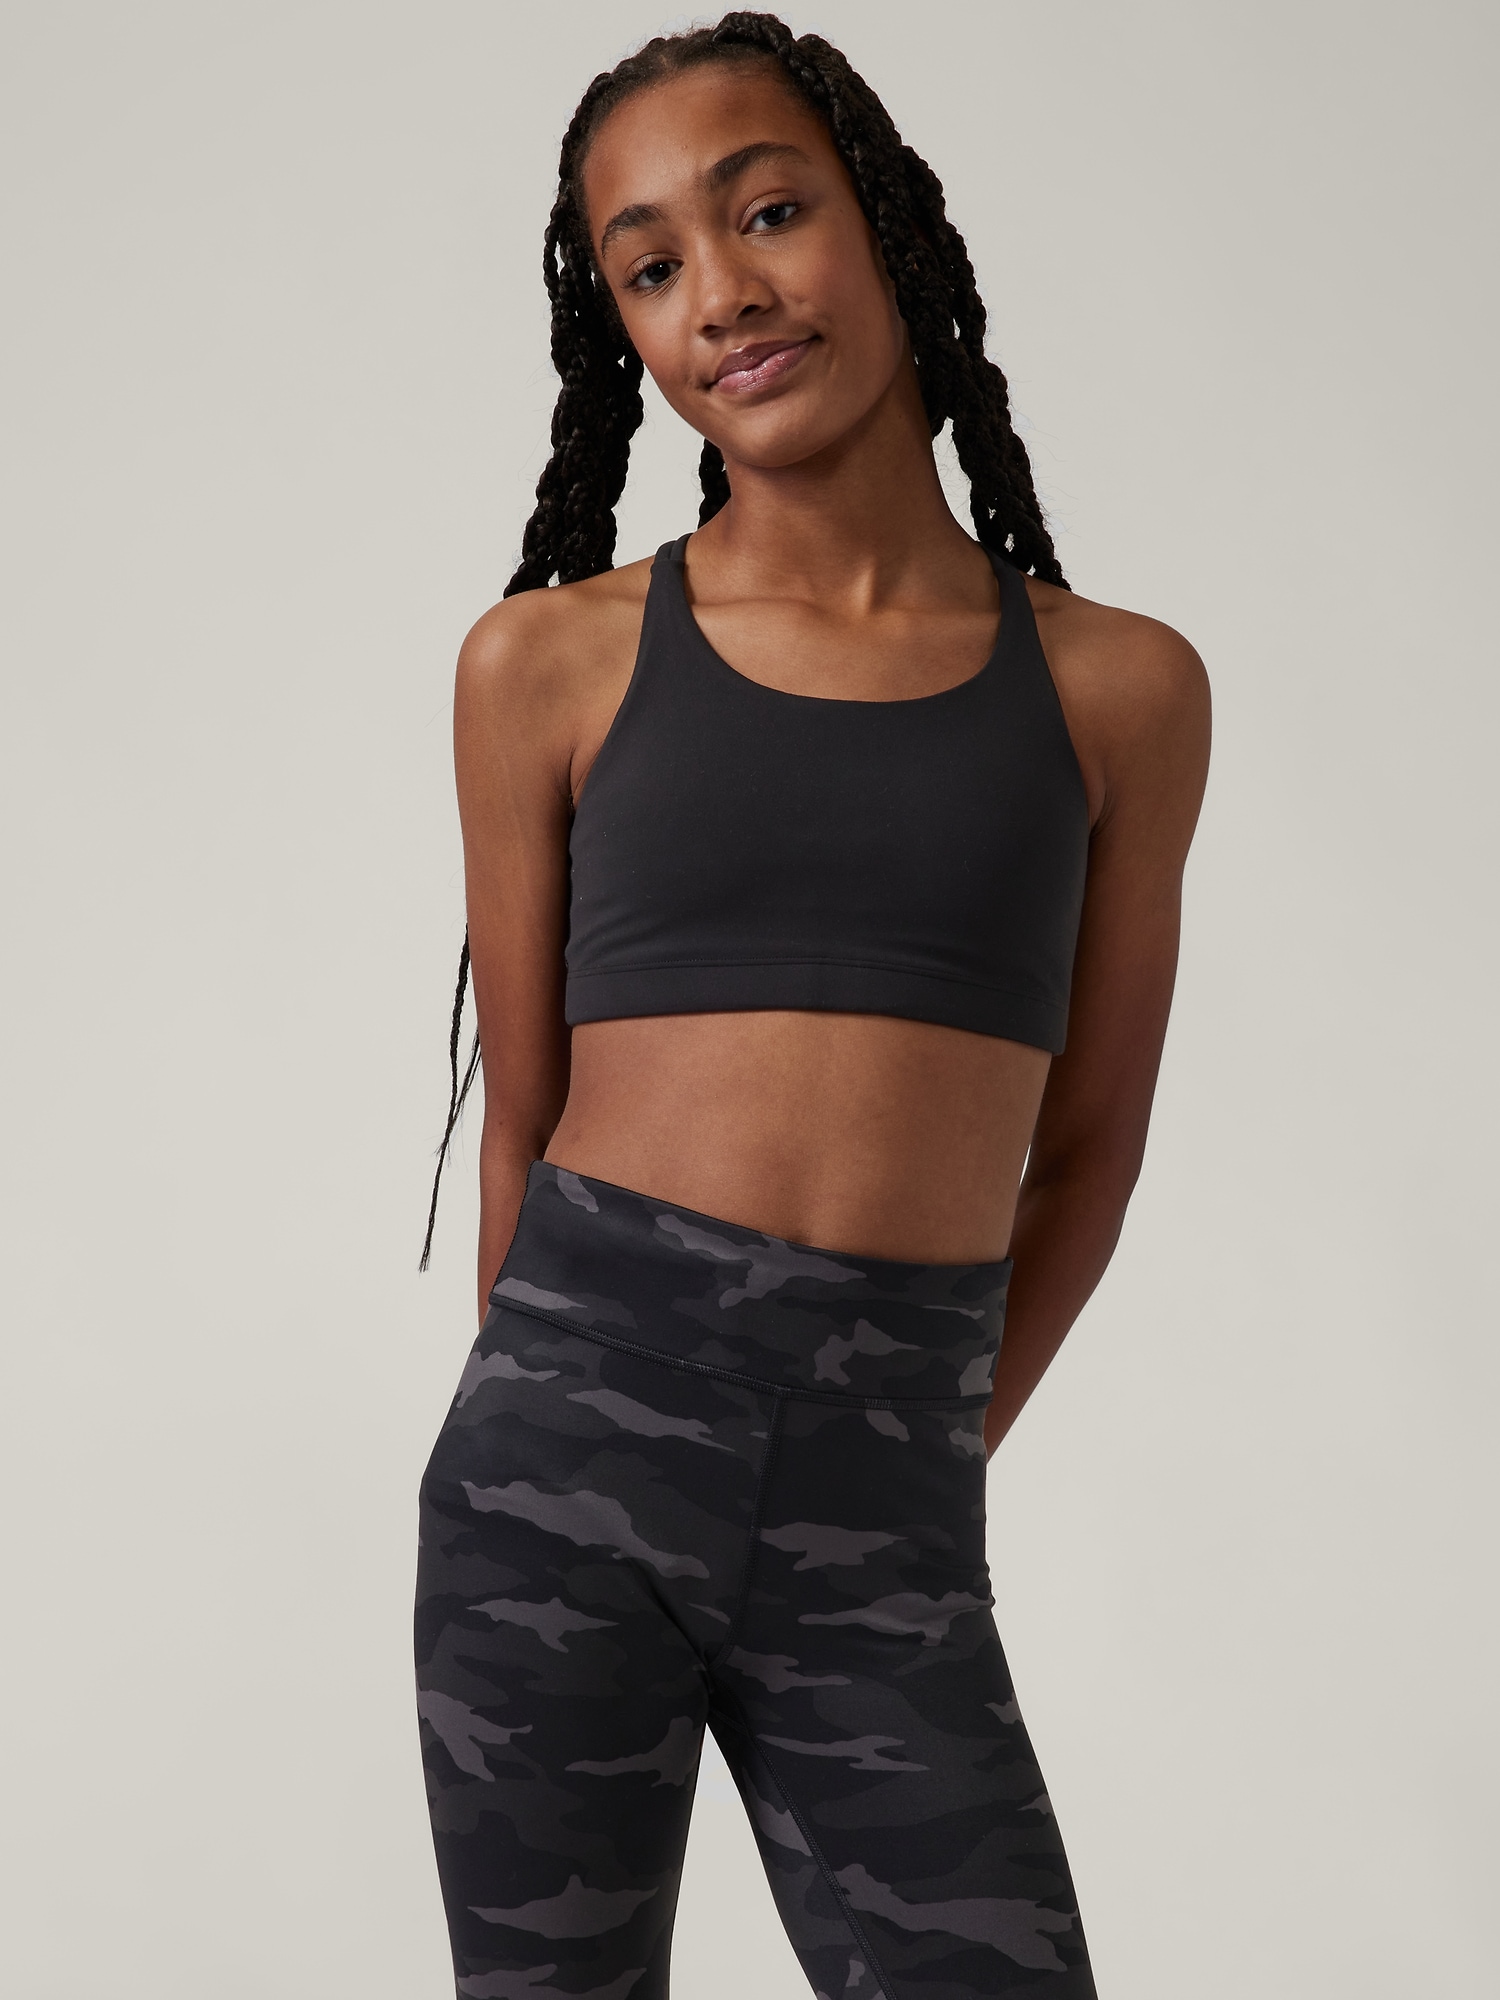 The 6 Best Sports Bras for Low-Impact Workouts of 2018